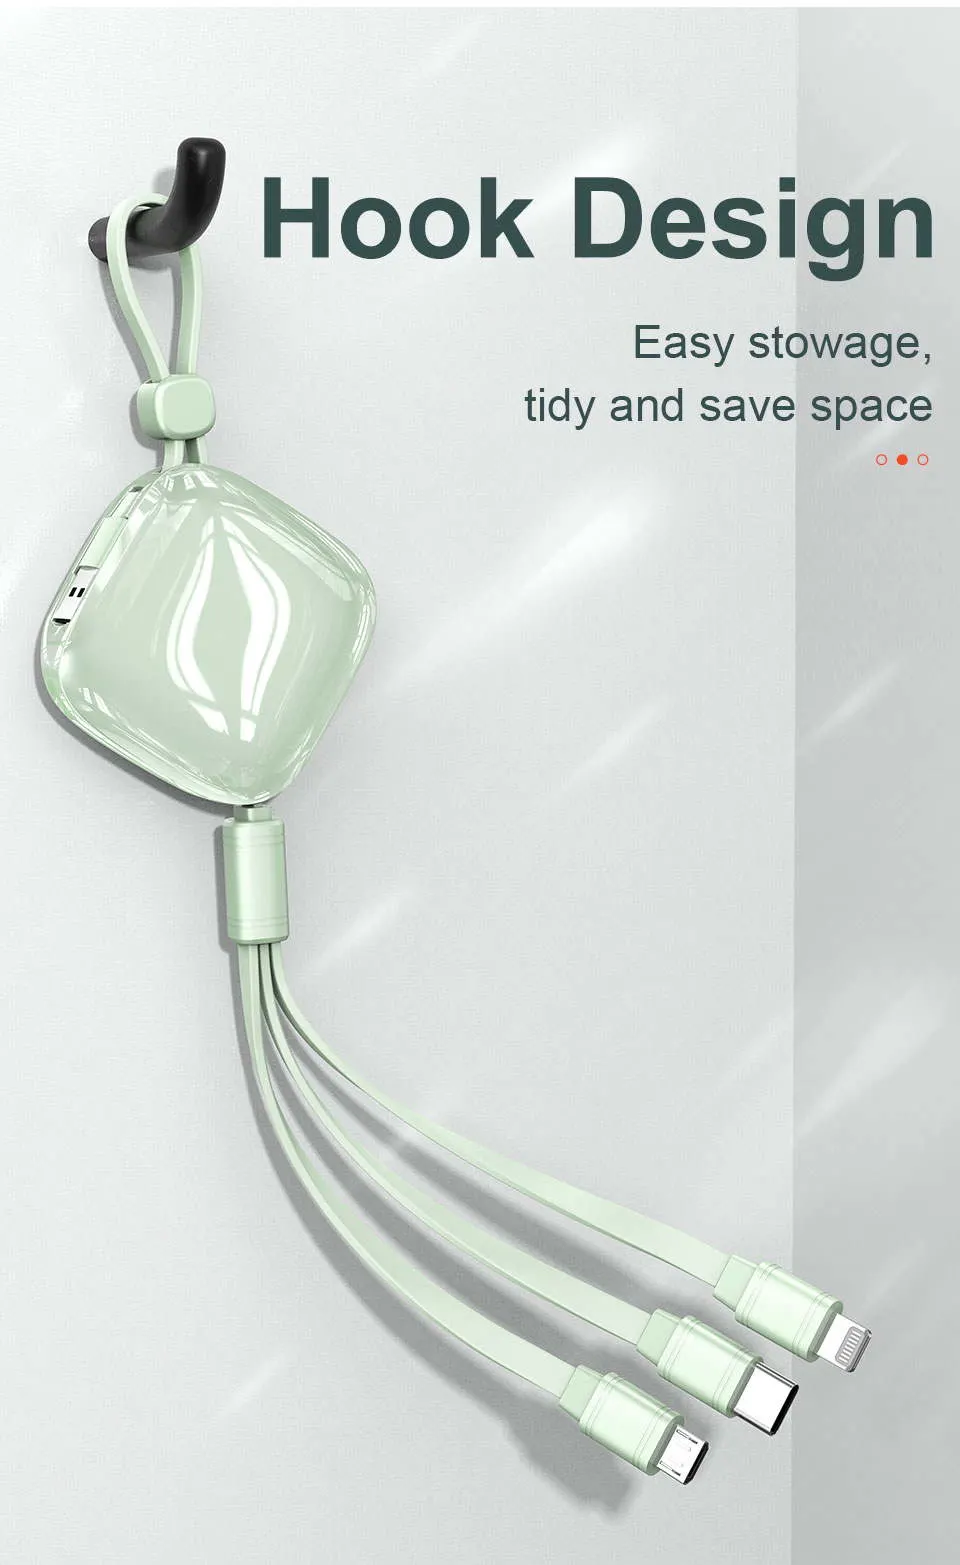 Best Selling Tongyinhai 1.2 M USB Groove Design 3A Quick Charge Retractable Cable for mobile Phone